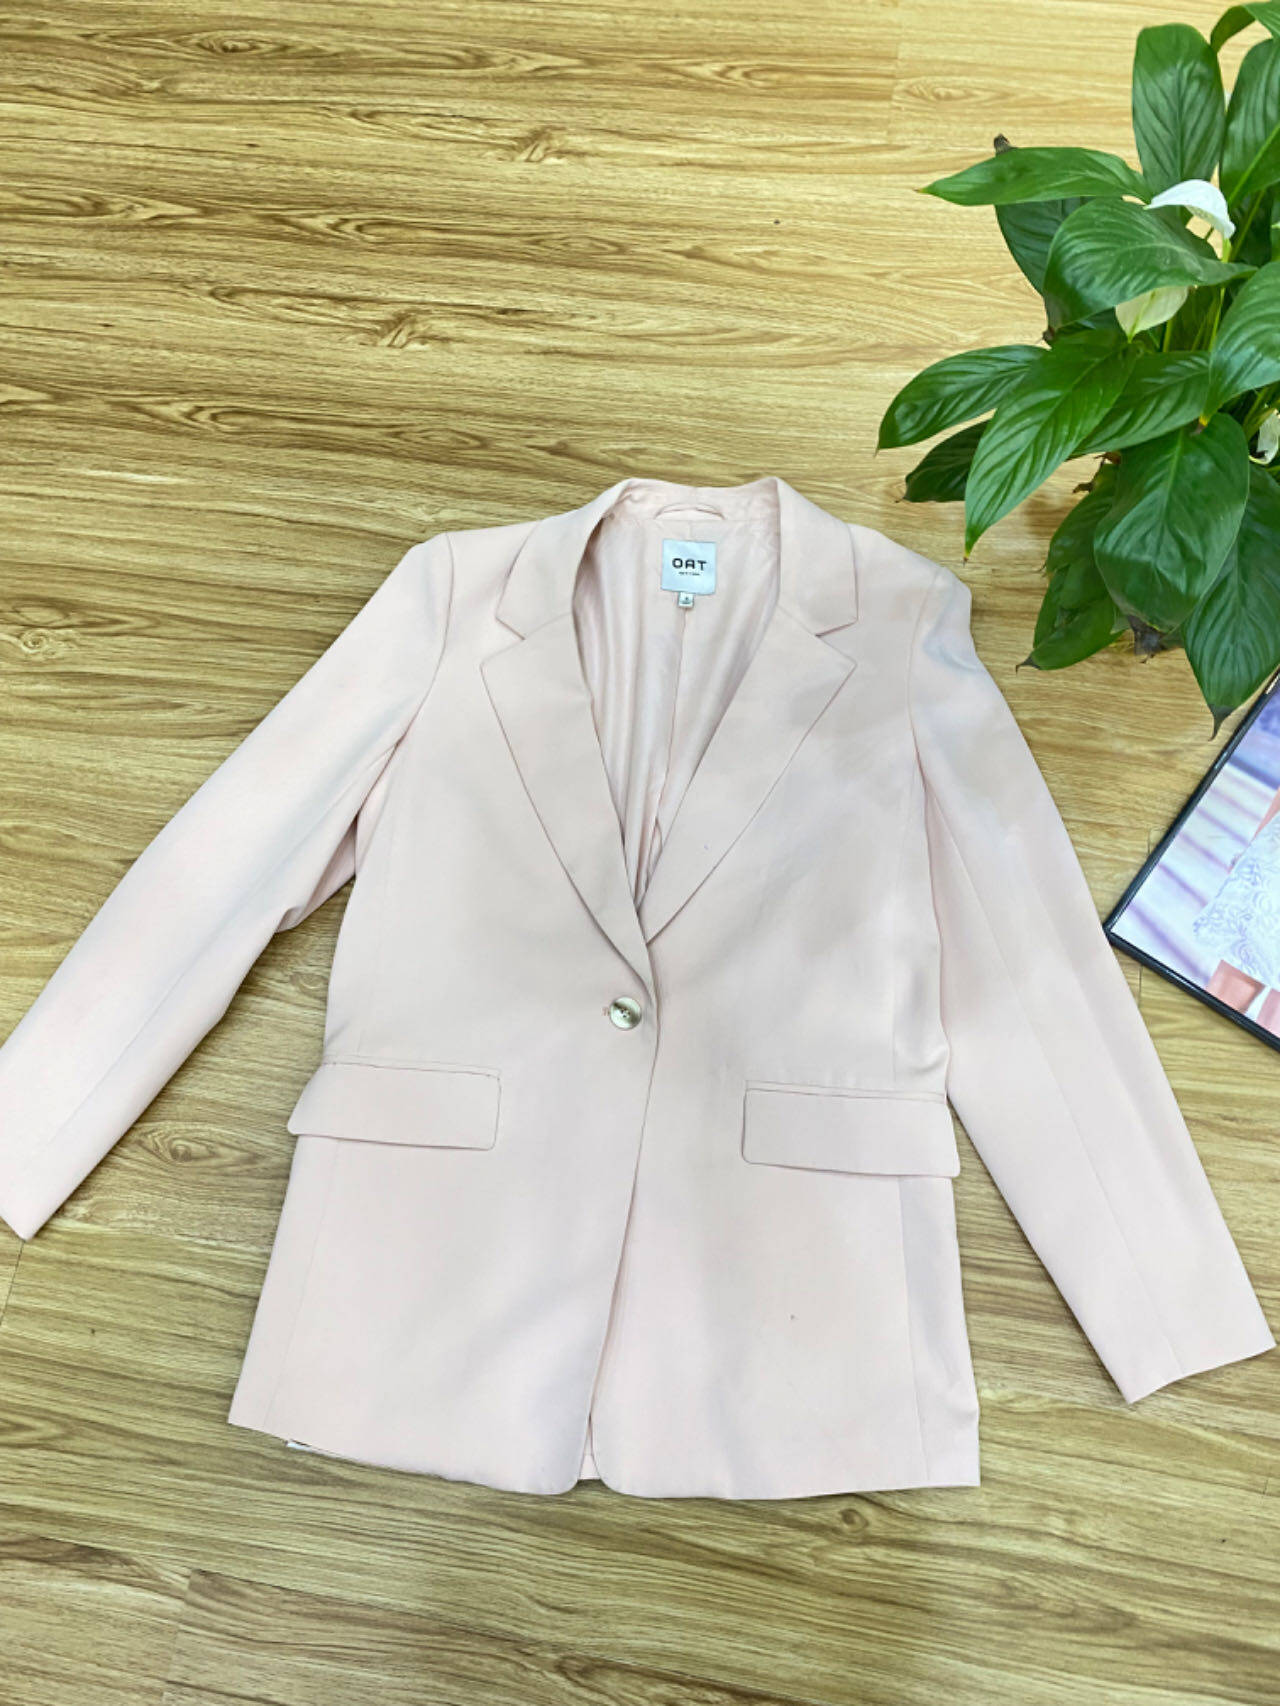 Summer women's high-quality office light colored single button slim fitting elegant long sleeved jacket suit